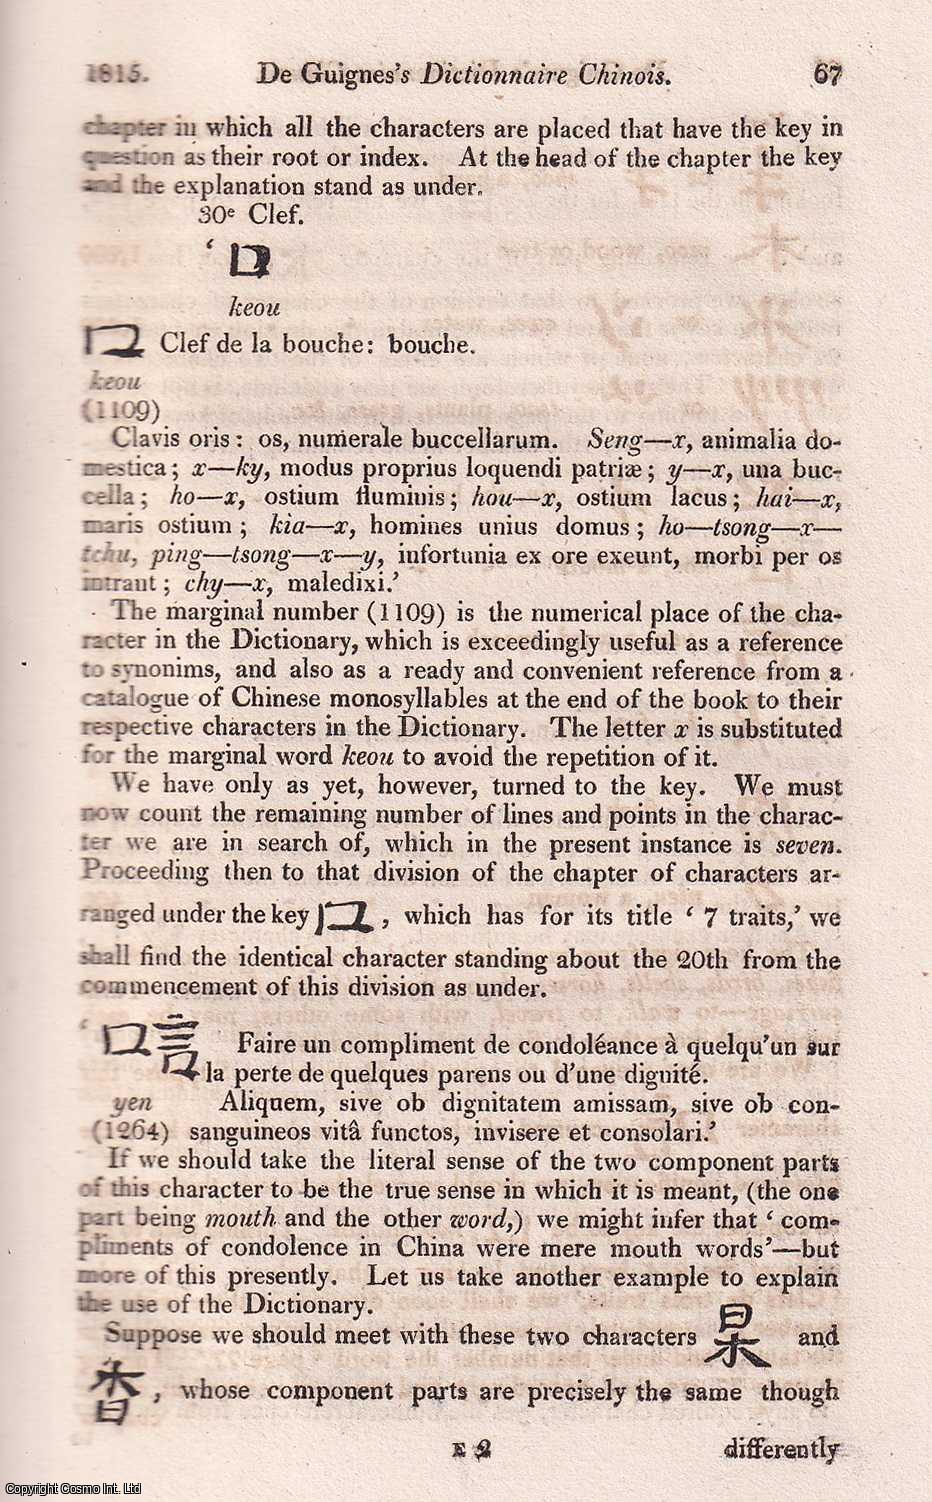 John Barrow - De Guignes' Dictionnaire Chinois; claimed to be the first European Chinese dictionary. An uncommon original article from The Quarterly Review, 1815. 1815.